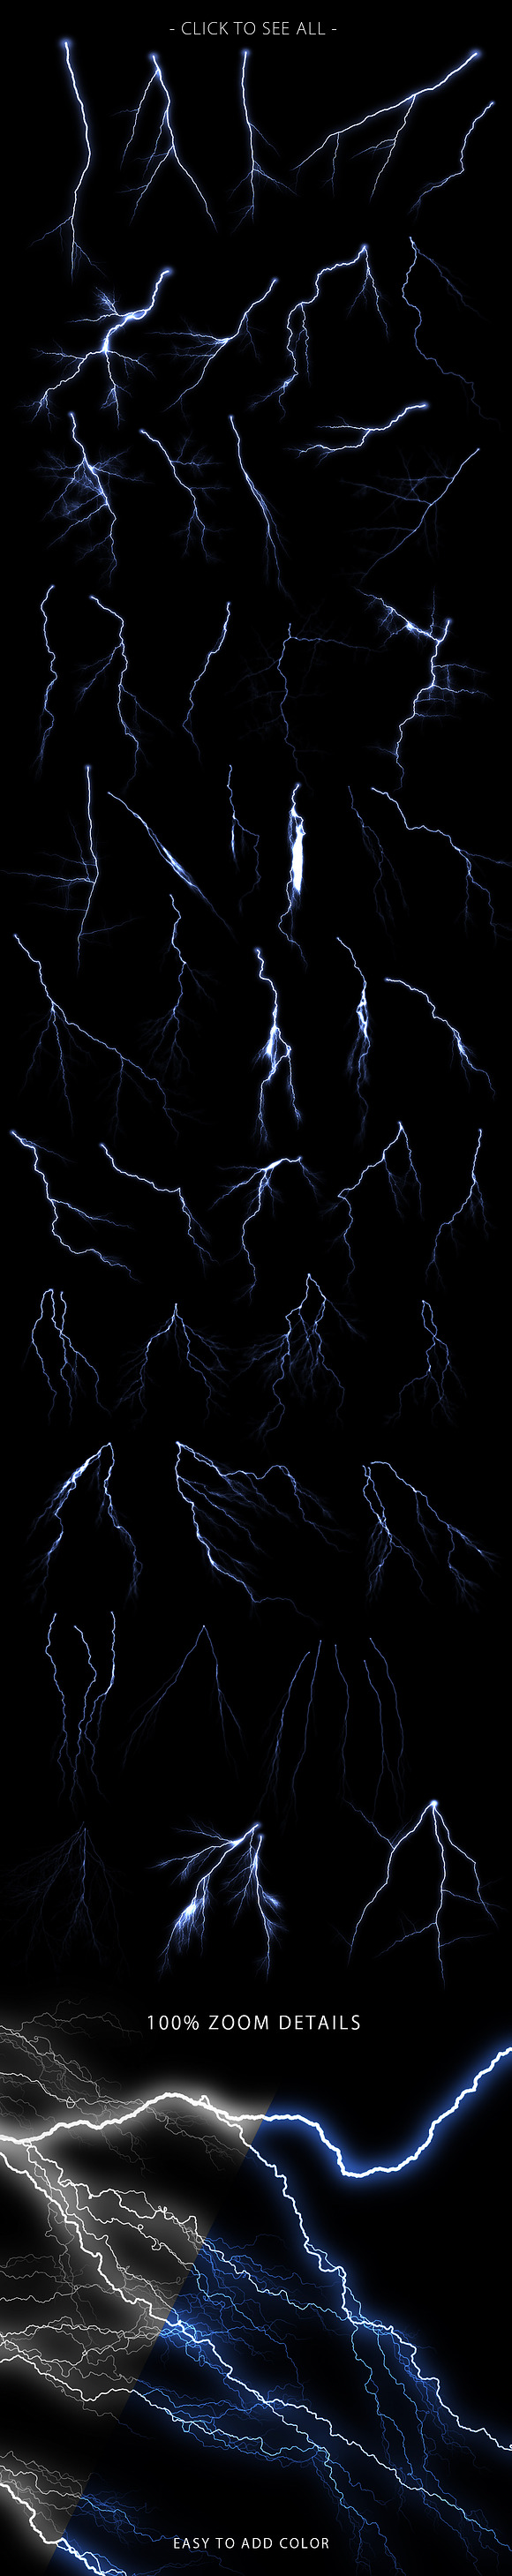 Lightning Photoshop Brushes in Photoshop Brushes - product preview 1